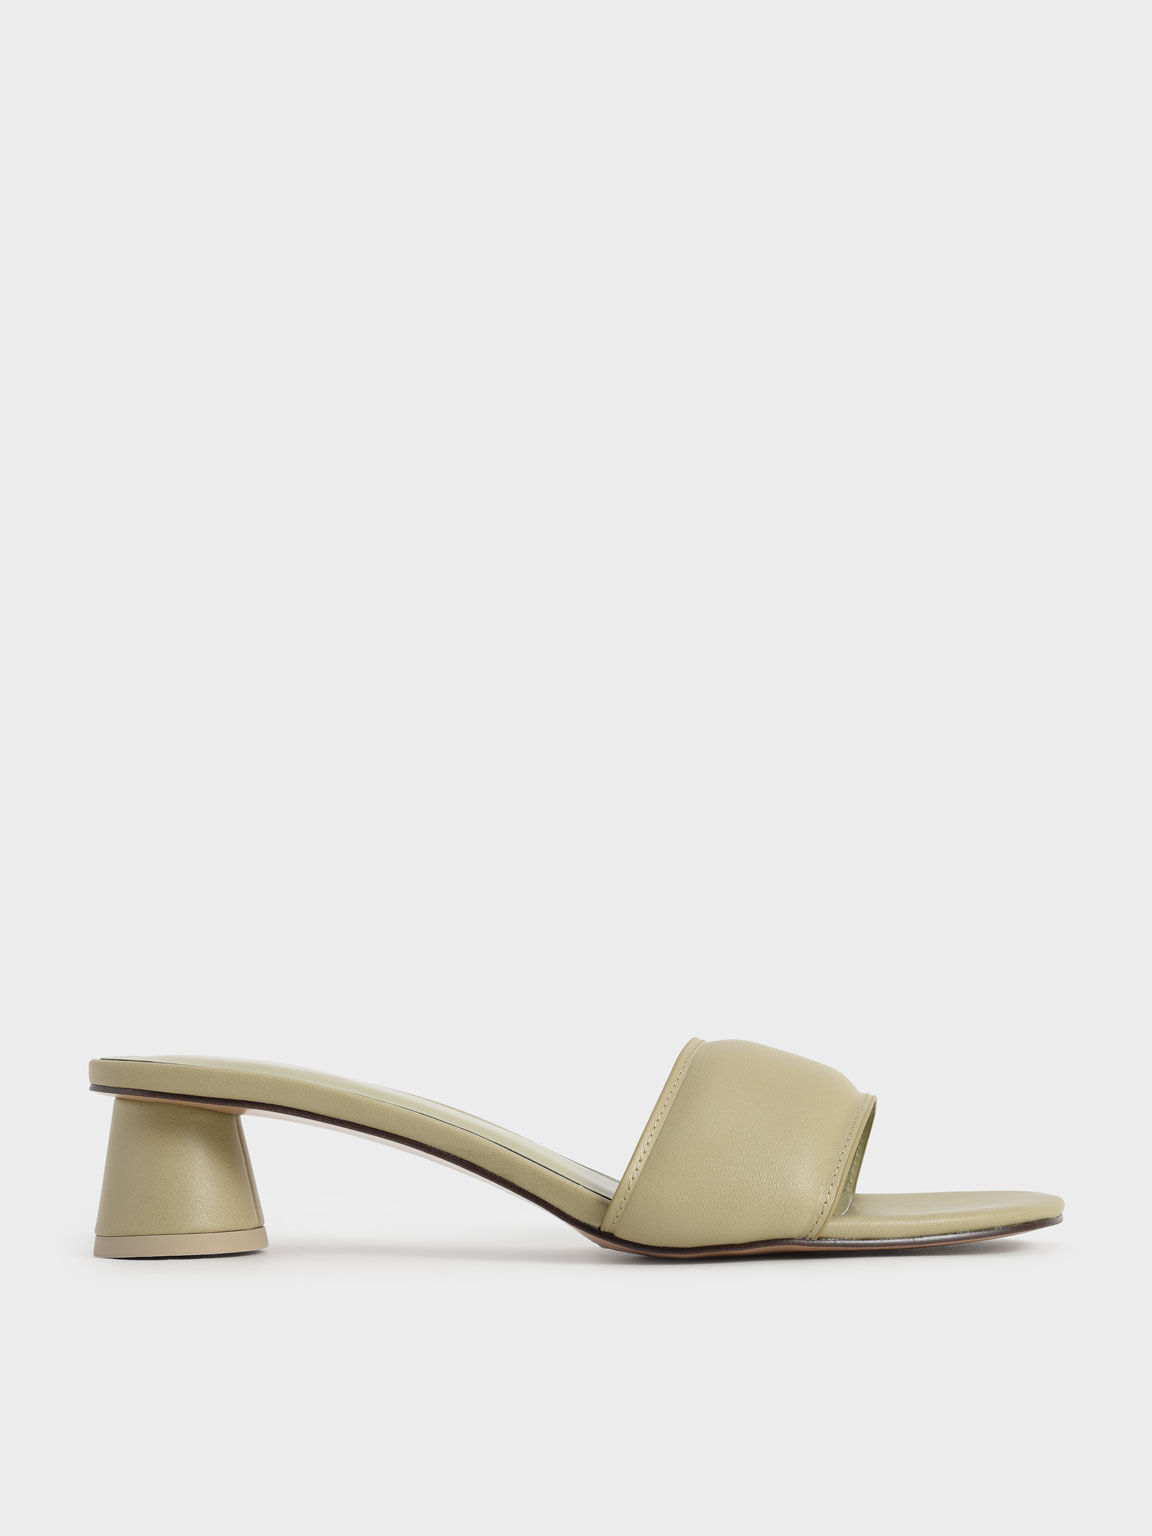 Sandal Puffy Cylindrical Heel Mules, Taupe, hi-res